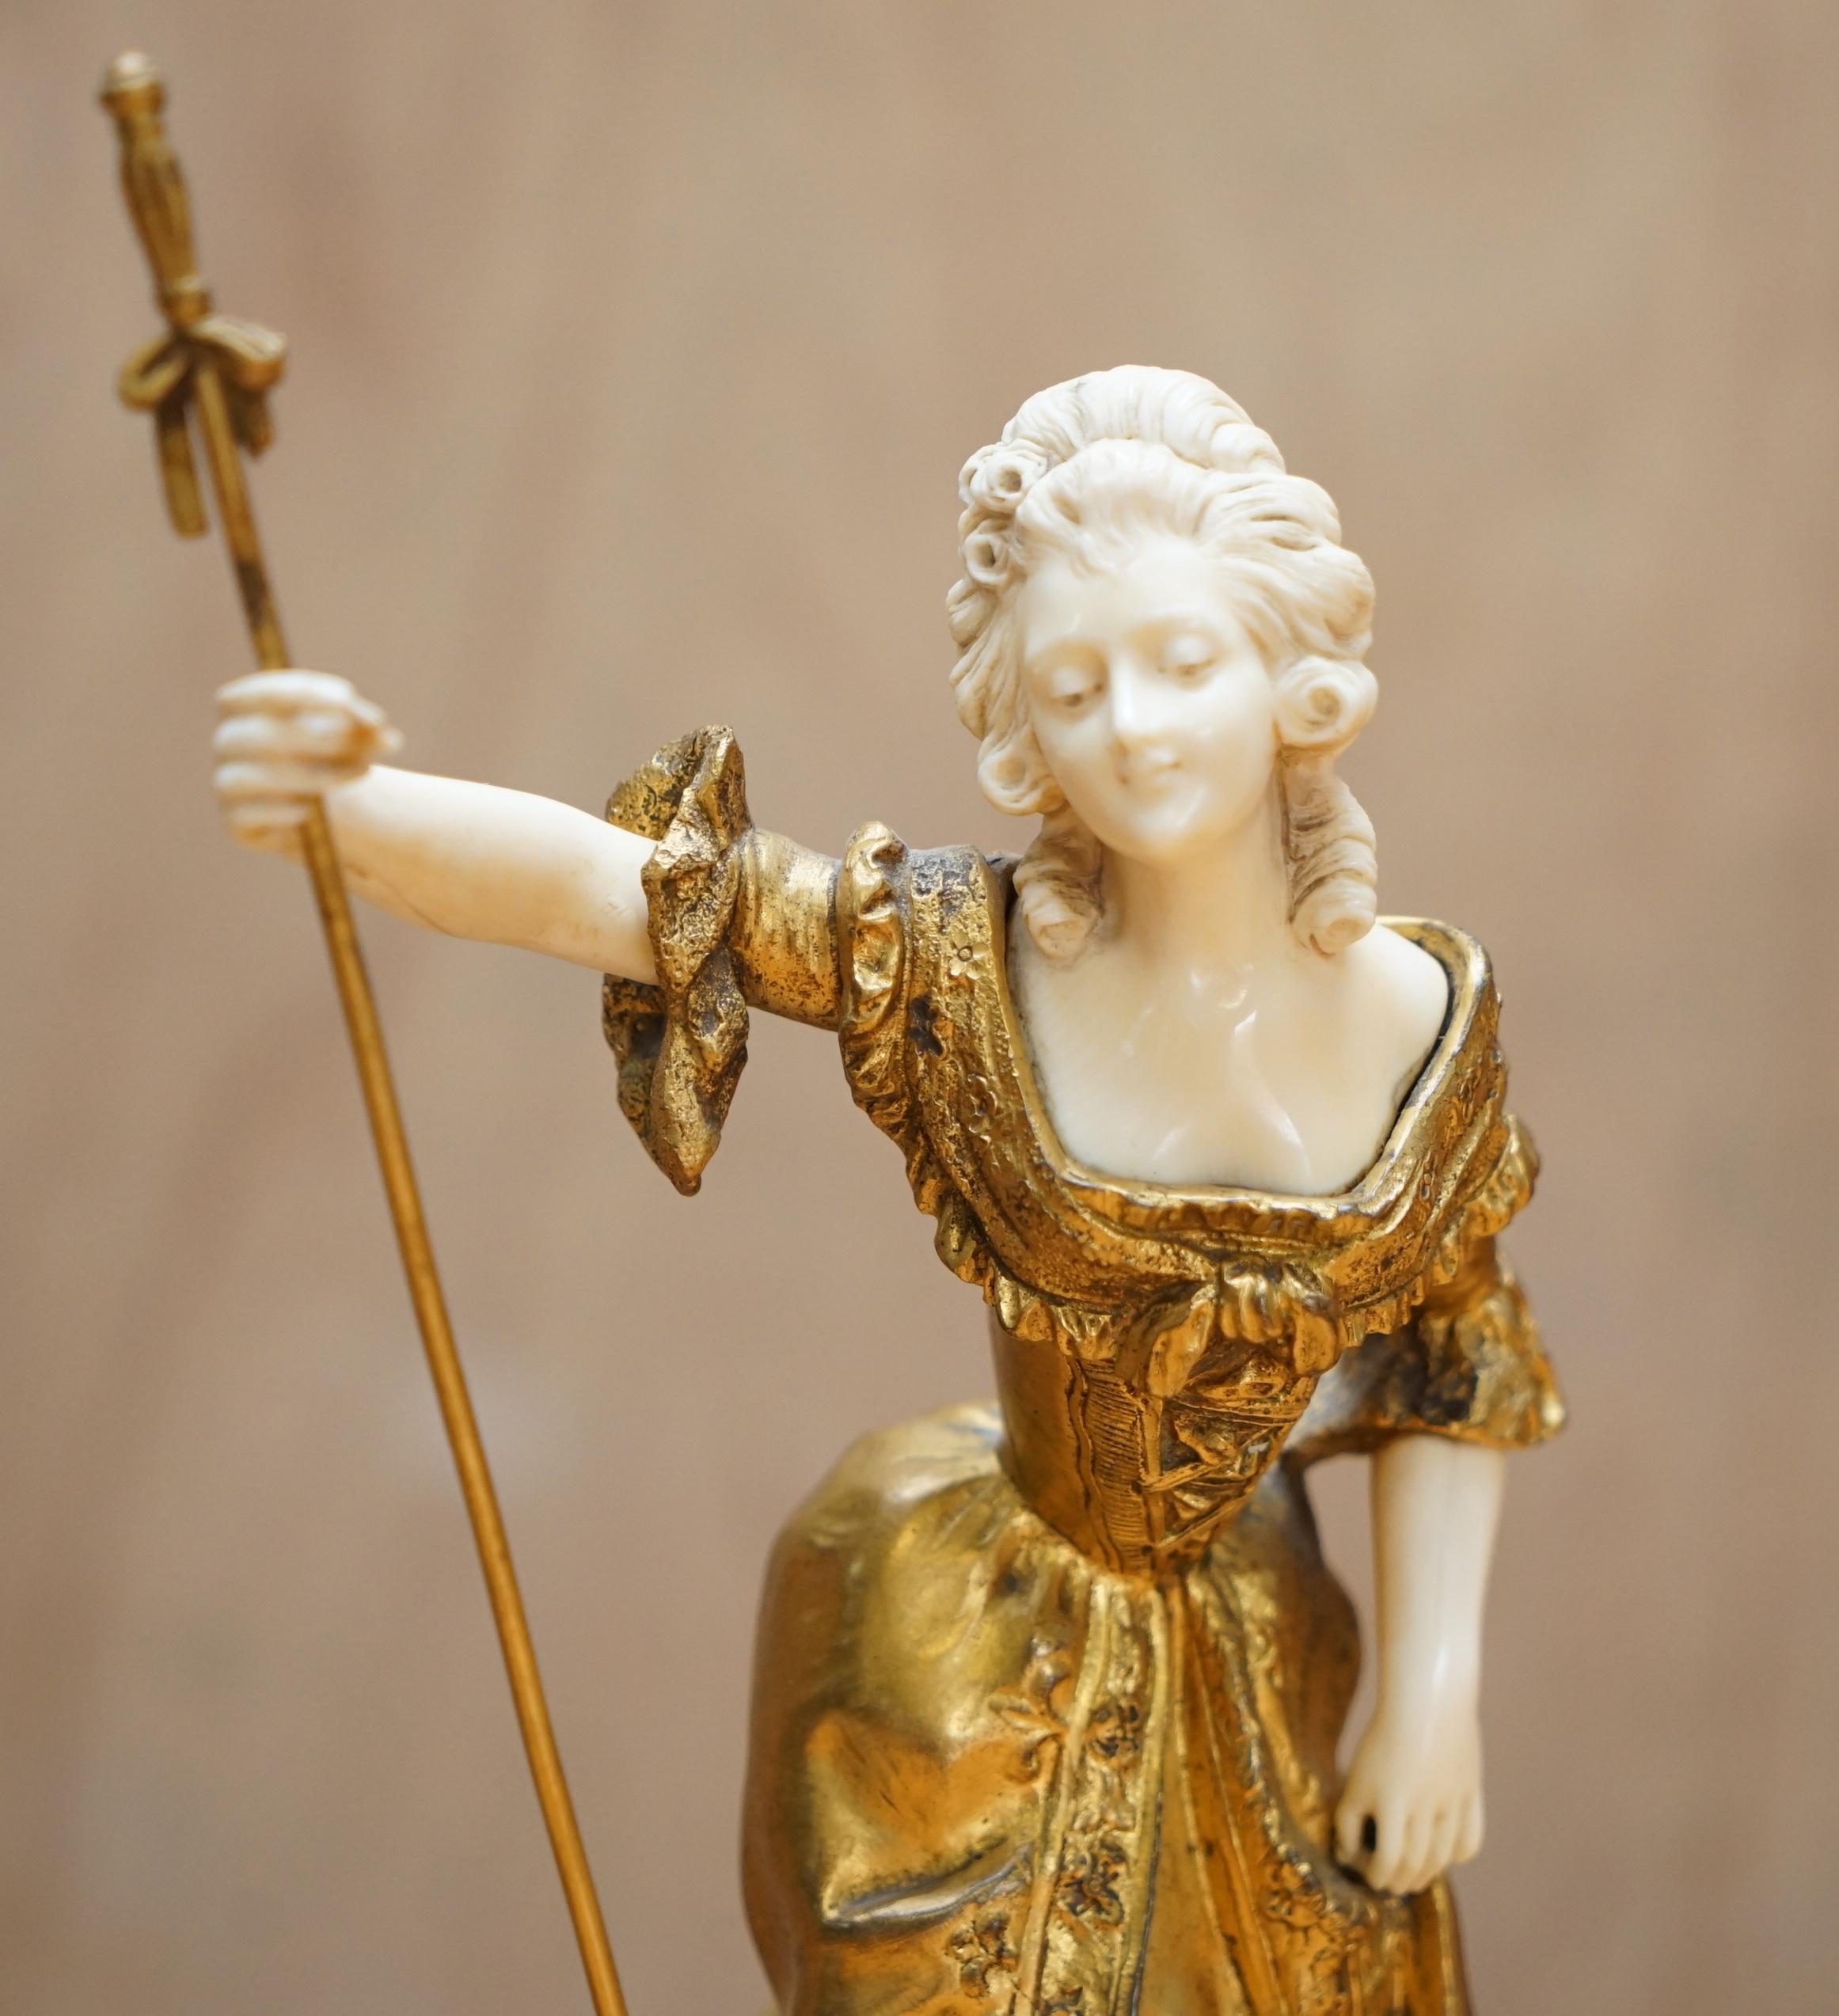 Royal House Antiques

Royal House Antiques is delighted to offer for sale this absolutely stunning, original, signed and stamped Dominique Alonzo 19th gold gilt bronze statue of a lady in 18th century dress

A truly stunning and highly collectable